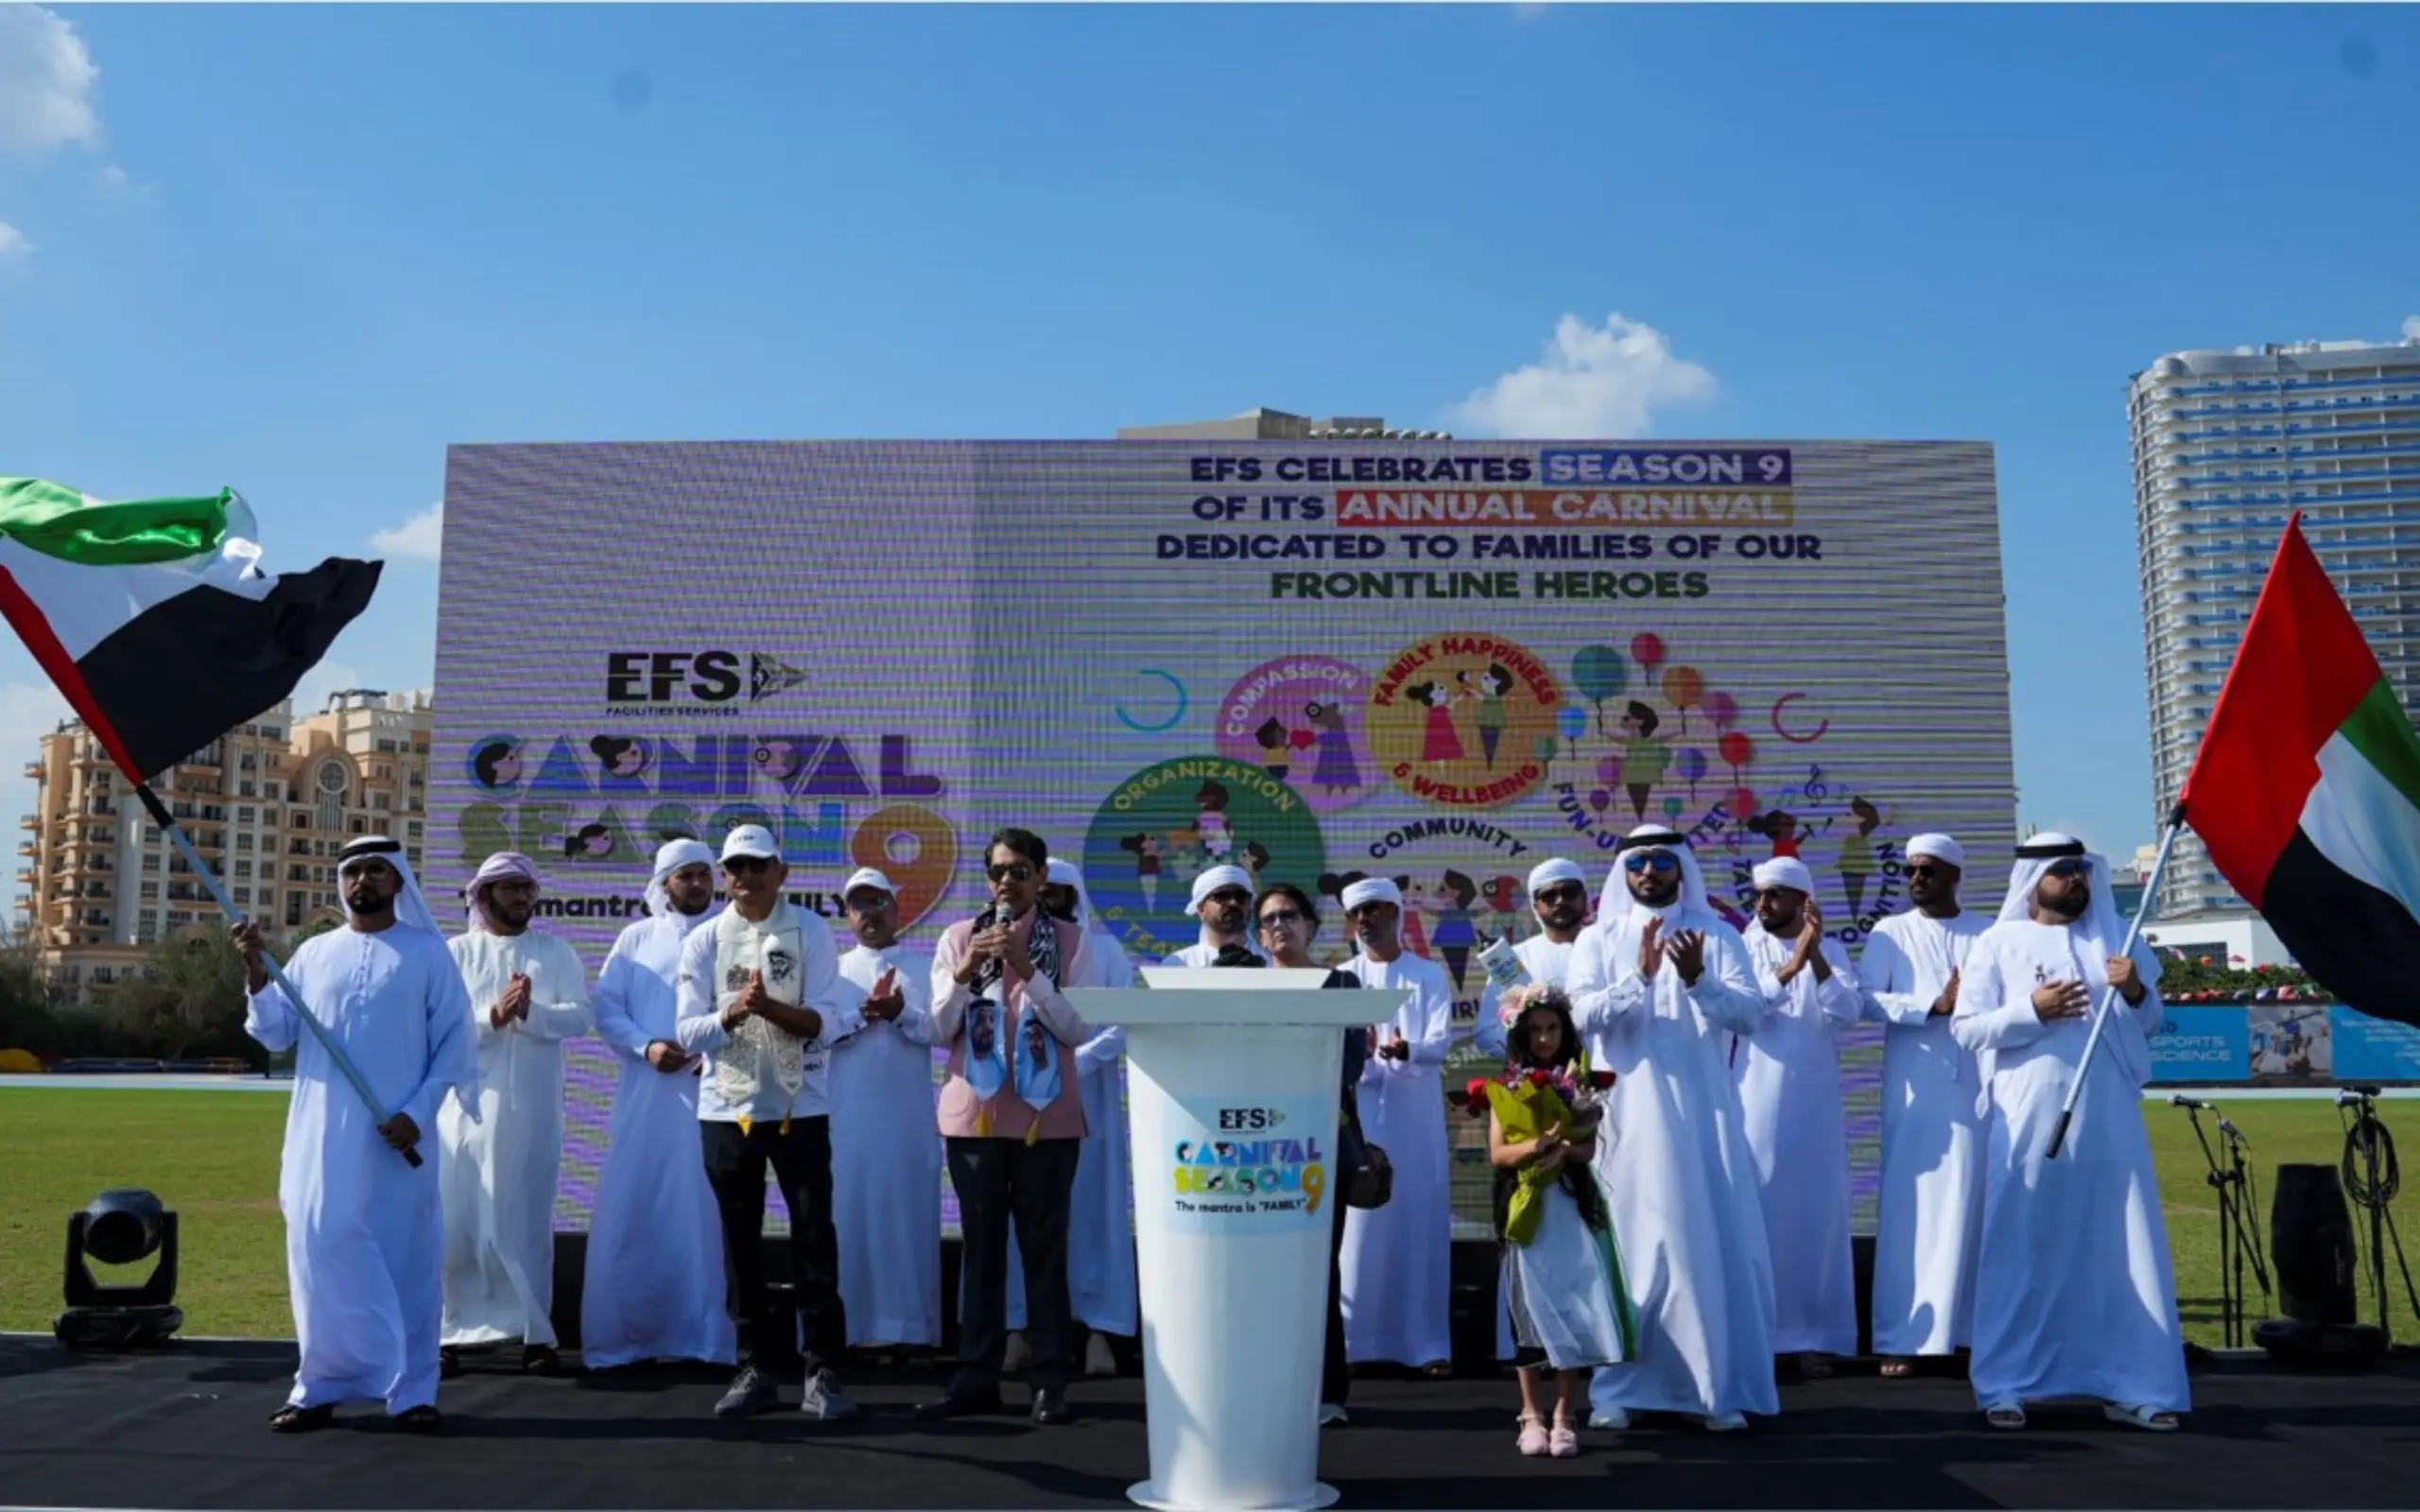 India-Ambassador-to-the-UAE-inaugurates-EFS-Carnival-season-9-worker-welfare-happiness-efs-facilities-services-group